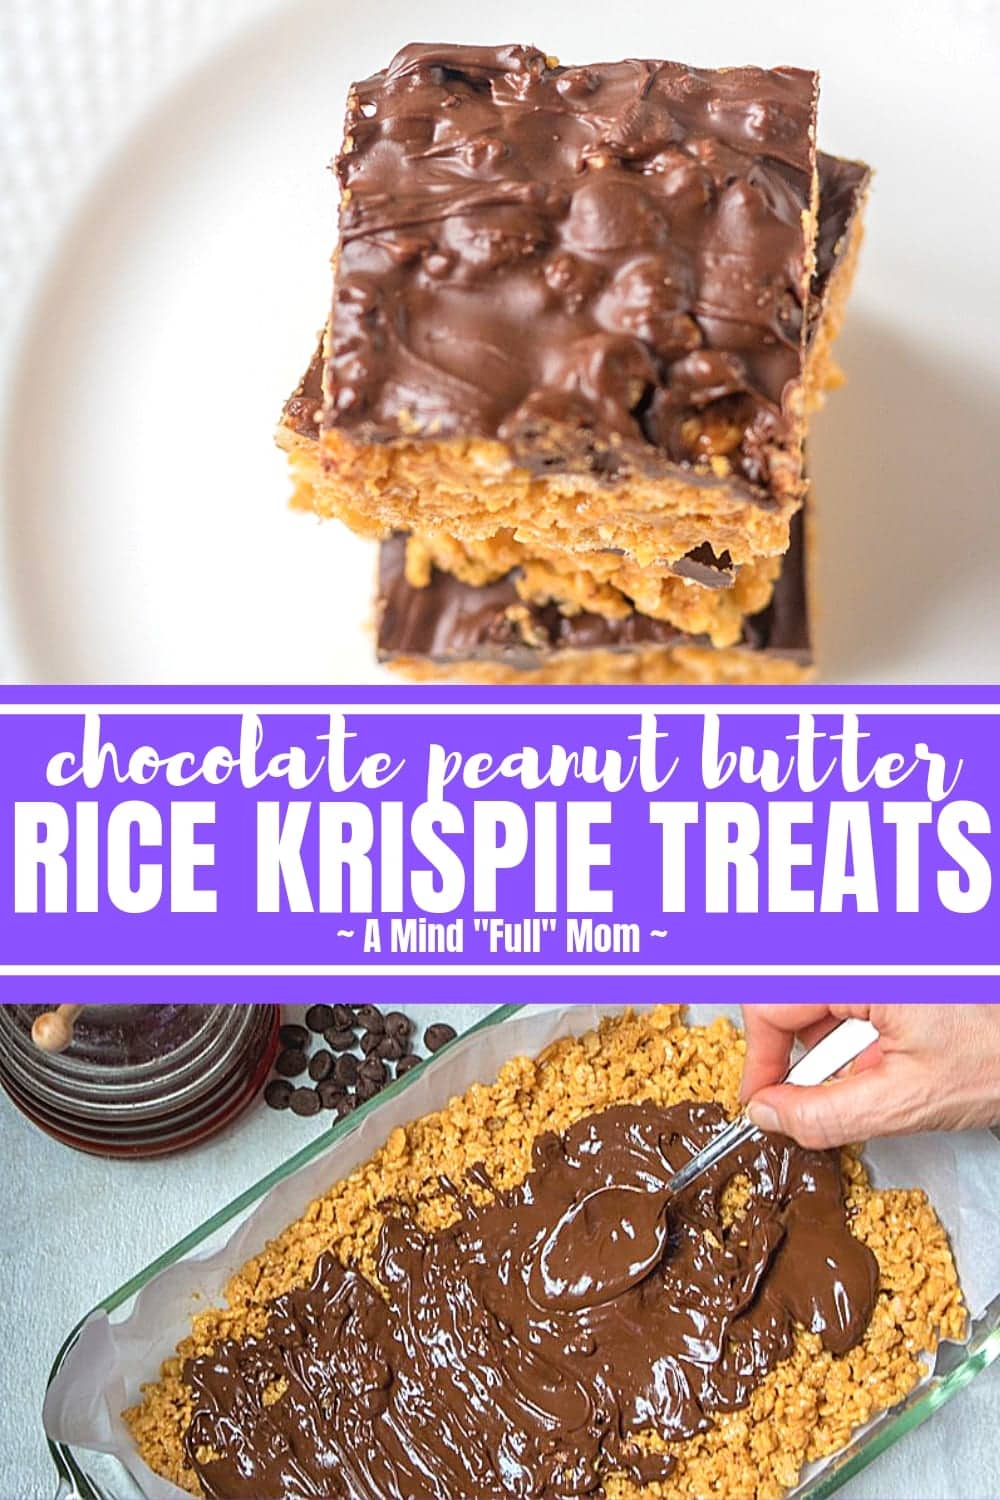 Peanut Butter Rice Krispie Treats are sure to be a family favorite! Chocolate Peanut Butter Rice Krispie Treats are a no-bake, marshmallow-free treat filled with rich peanut butter butter and a thick layer of chocolate.